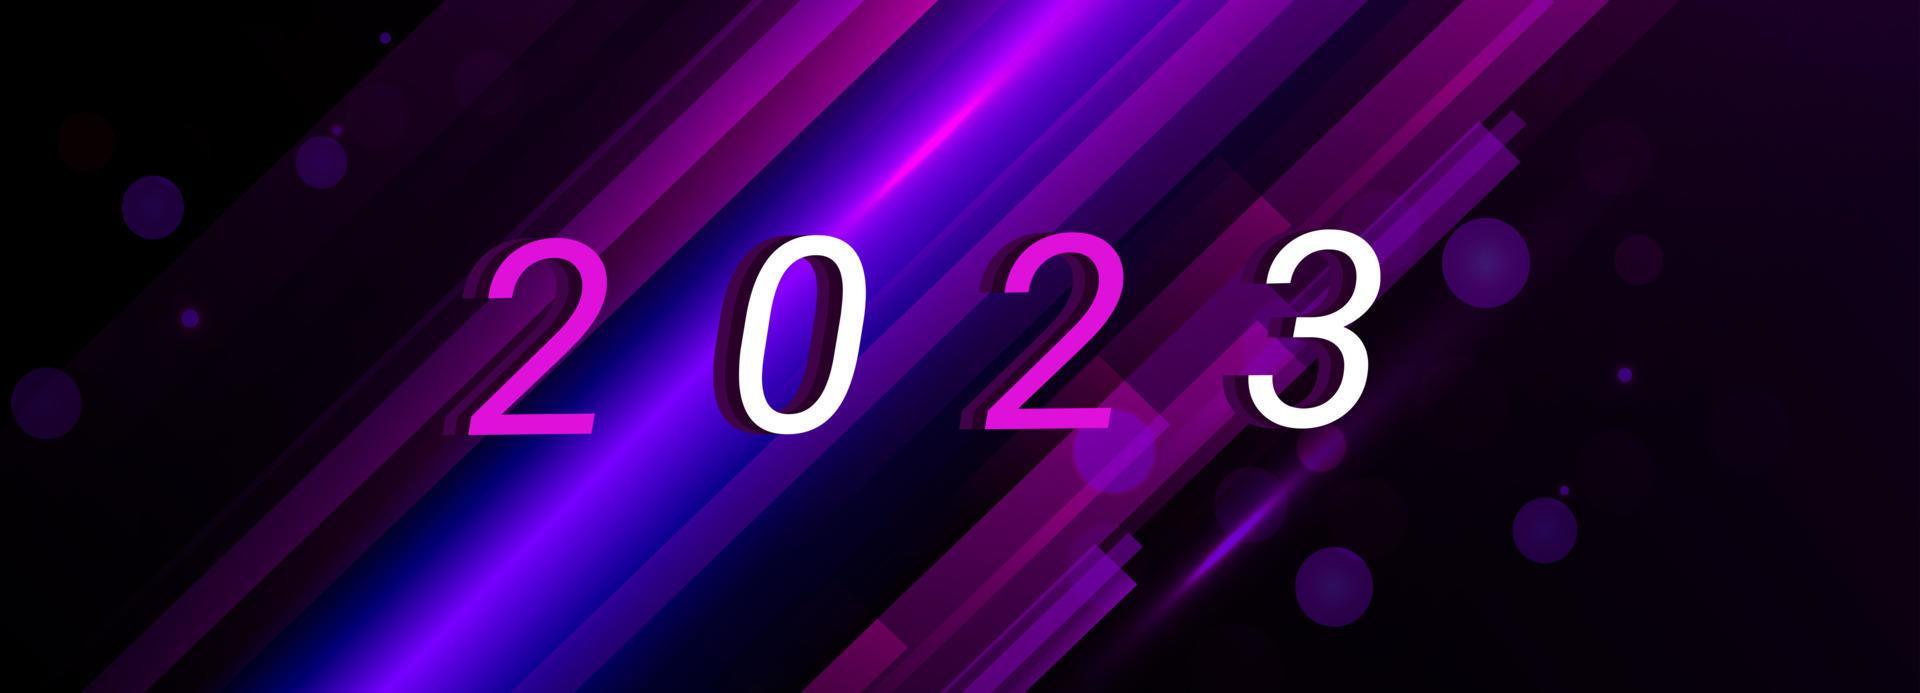 Neon Lights HD Happy New Year 2023 Facebook Twitter Covers